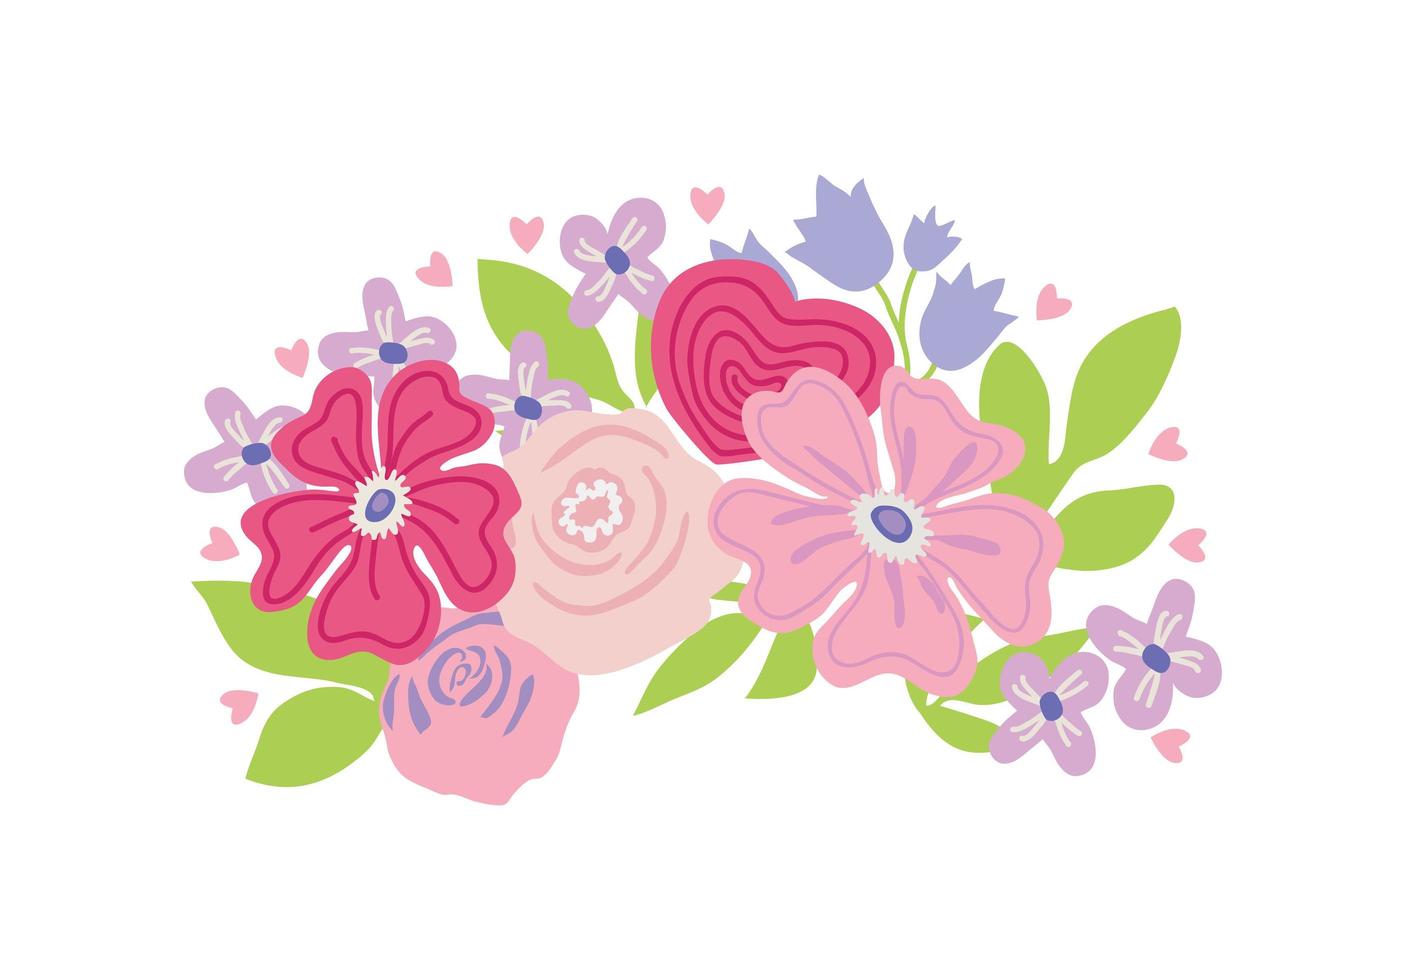 Beautiful cute hand drawn flowers and leaves in a bouquet. Roses, forget-me-nots, bluebells, daisies. Vector flat illustration, for Womens Day, birthday, wedding, retro style